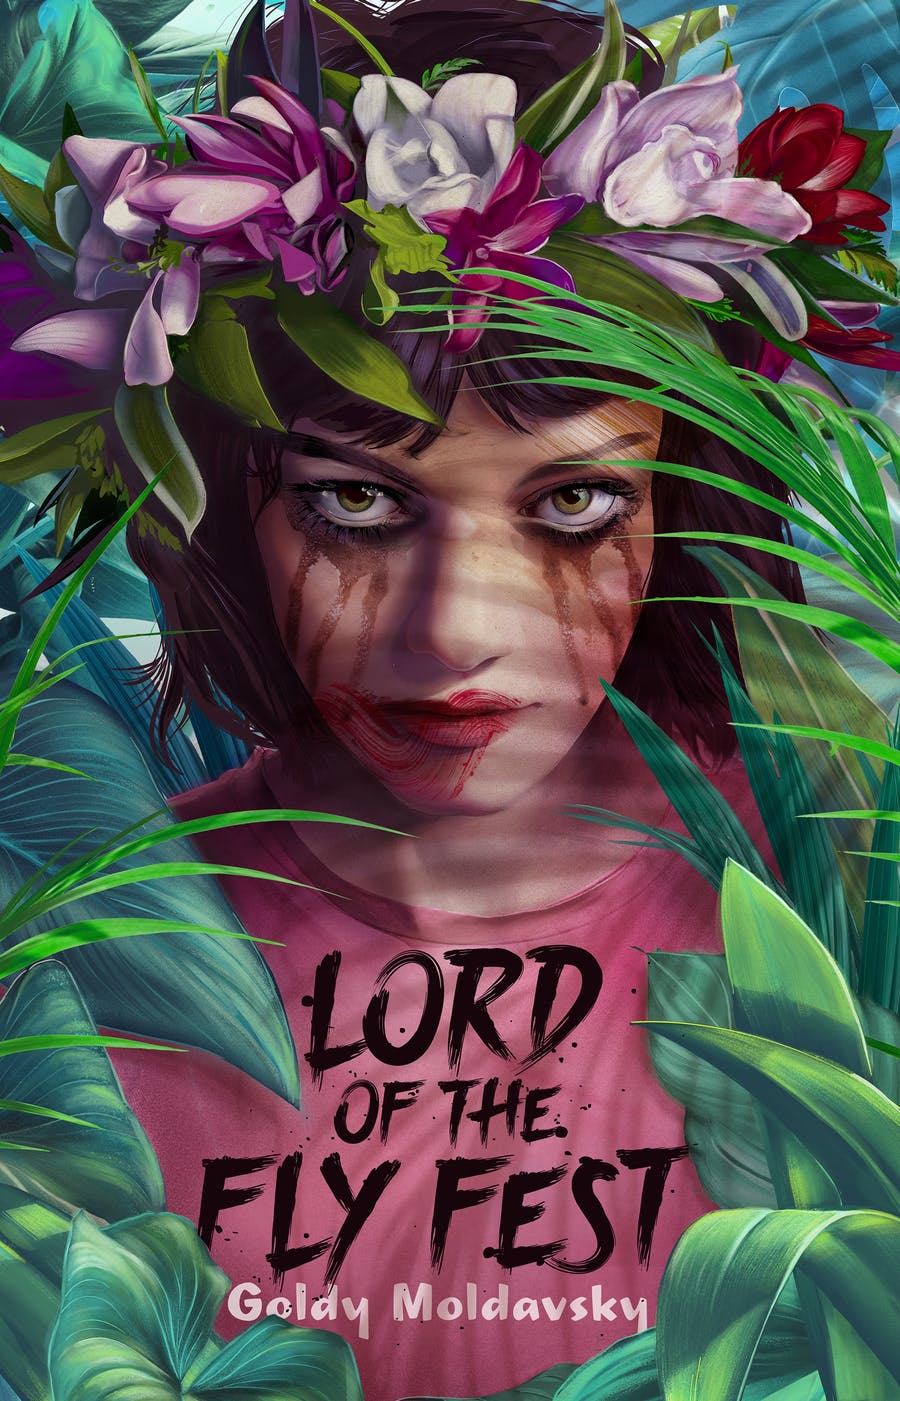 Book Lord of the Fly Fest